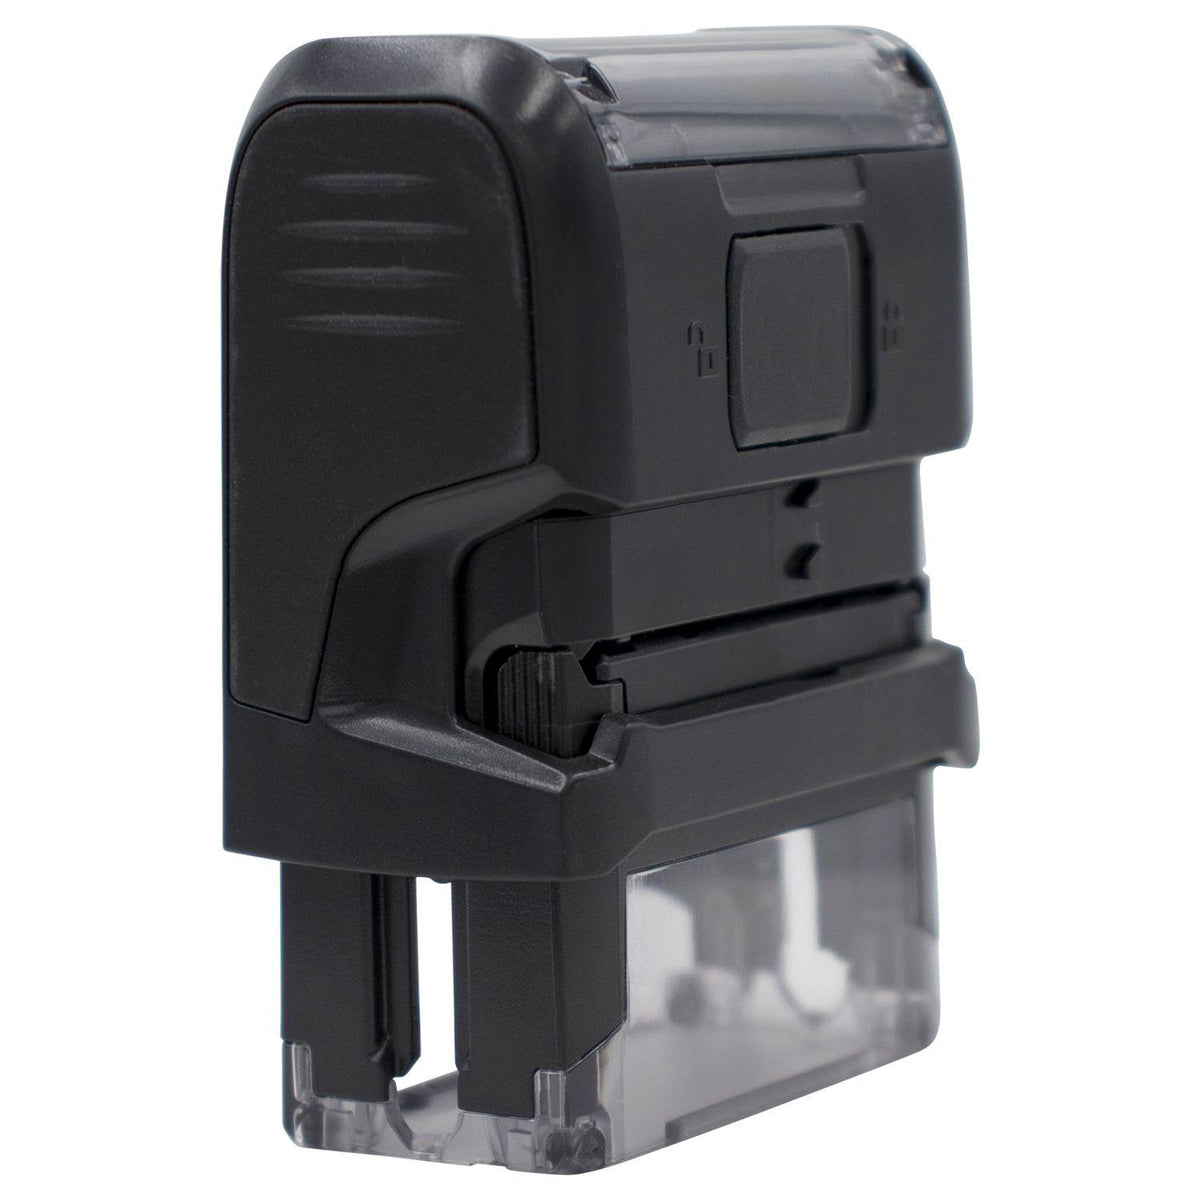 Self-Inking Essential Job Stamp - Engineer Seal Stamps - Brand_Trodat, Impression Size_Small, Stamp Type_Self-Inking Stamp, Type of Use_Business, Type of Use_General, Type of Use_Medical Office